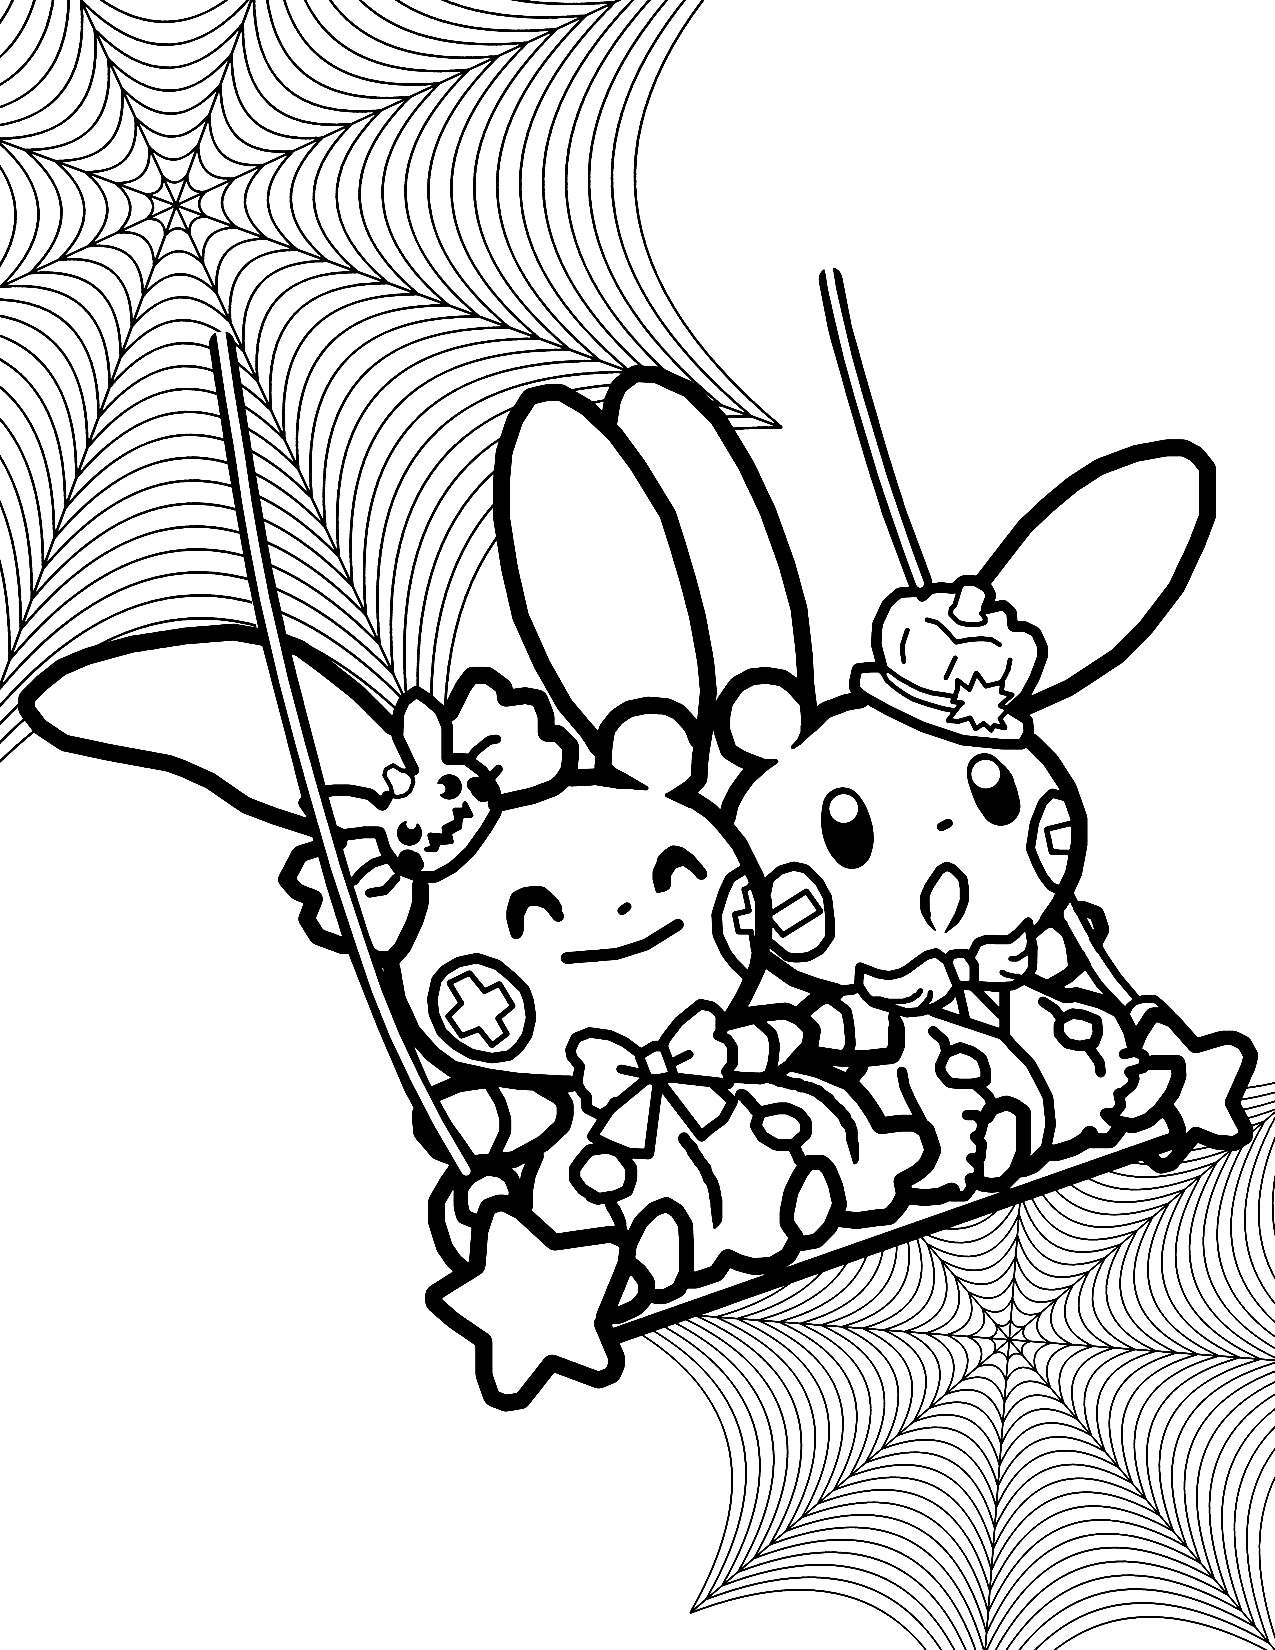 Cute Pokemon Halloween Coloring Page